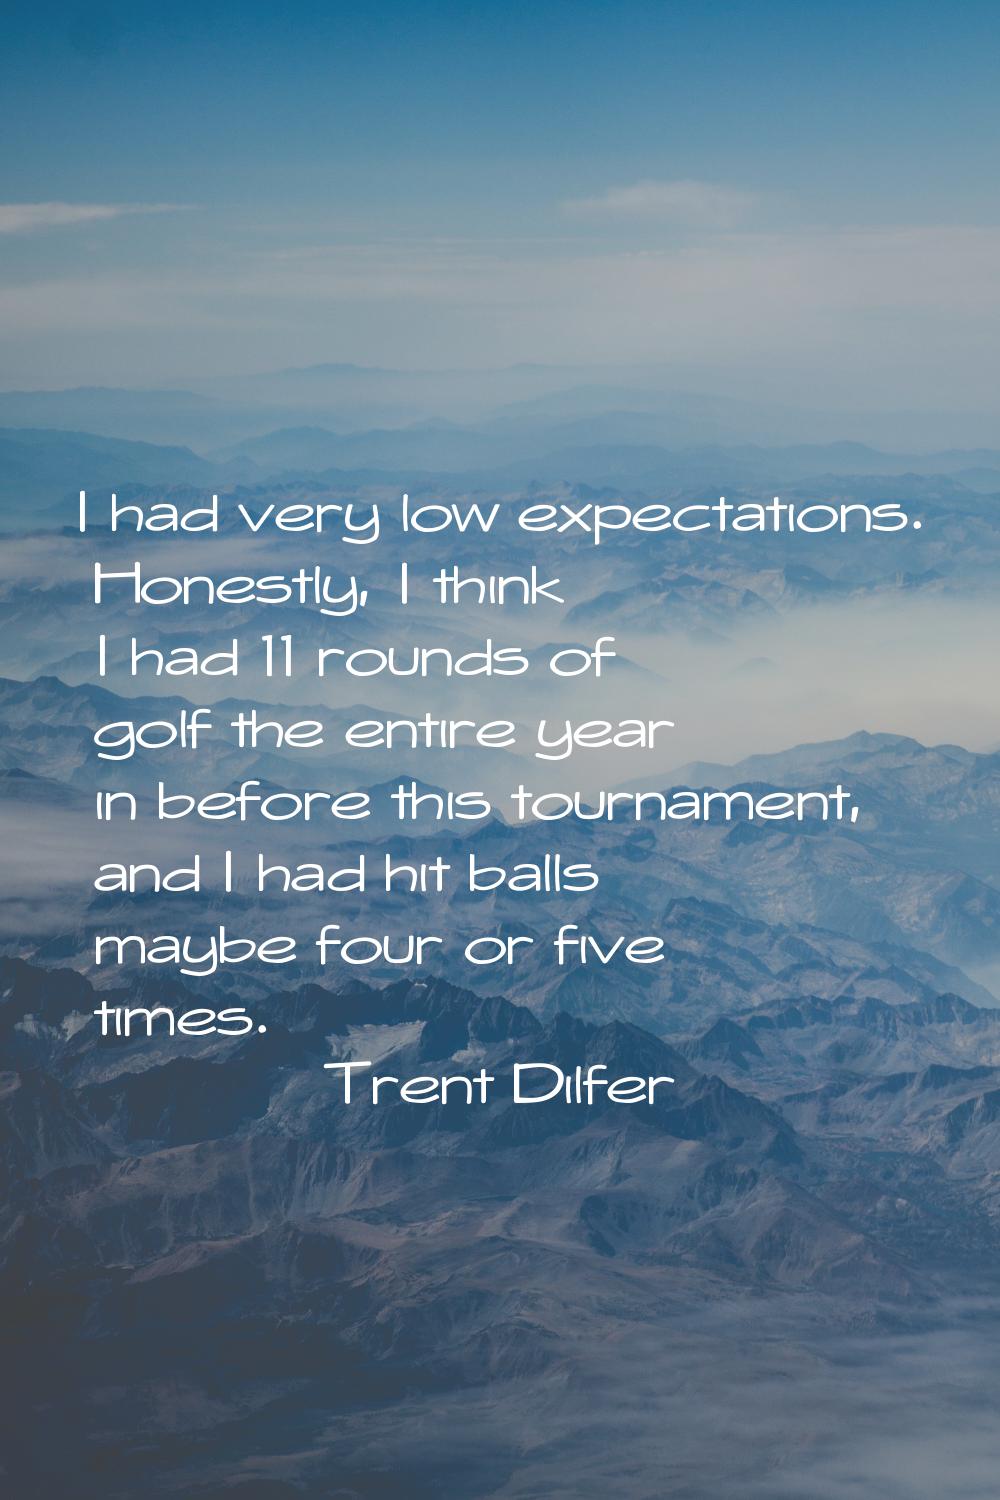 I had very low expectations. Honestly, I think I had 11 rounds of golf the entire year in before th